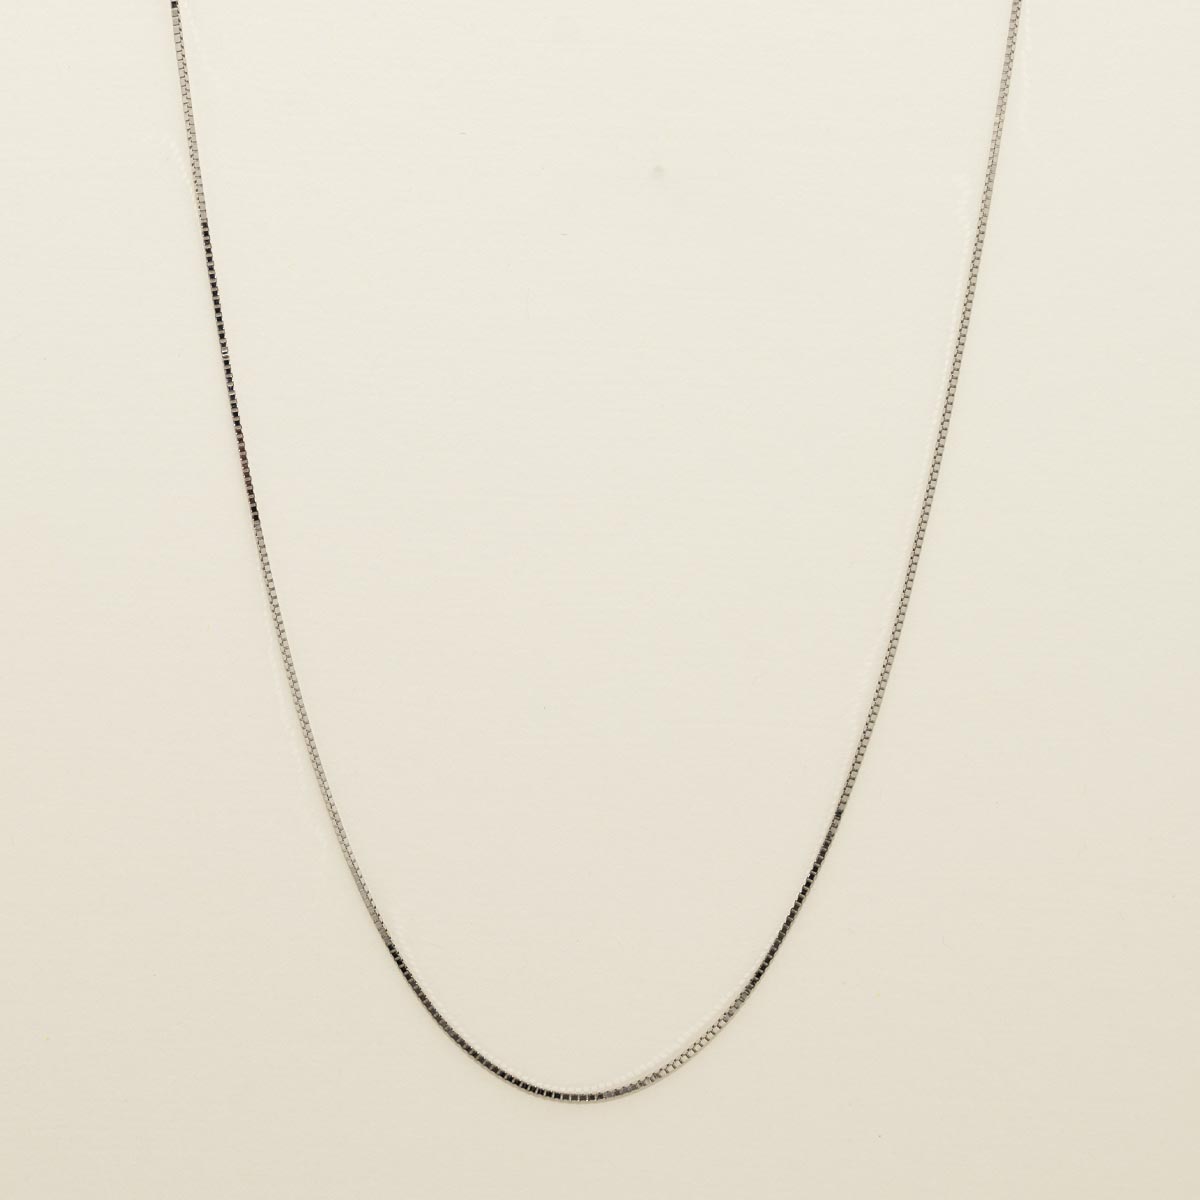 Box Chain in 14kt White Gold (18 inches and 0.8mm wide)